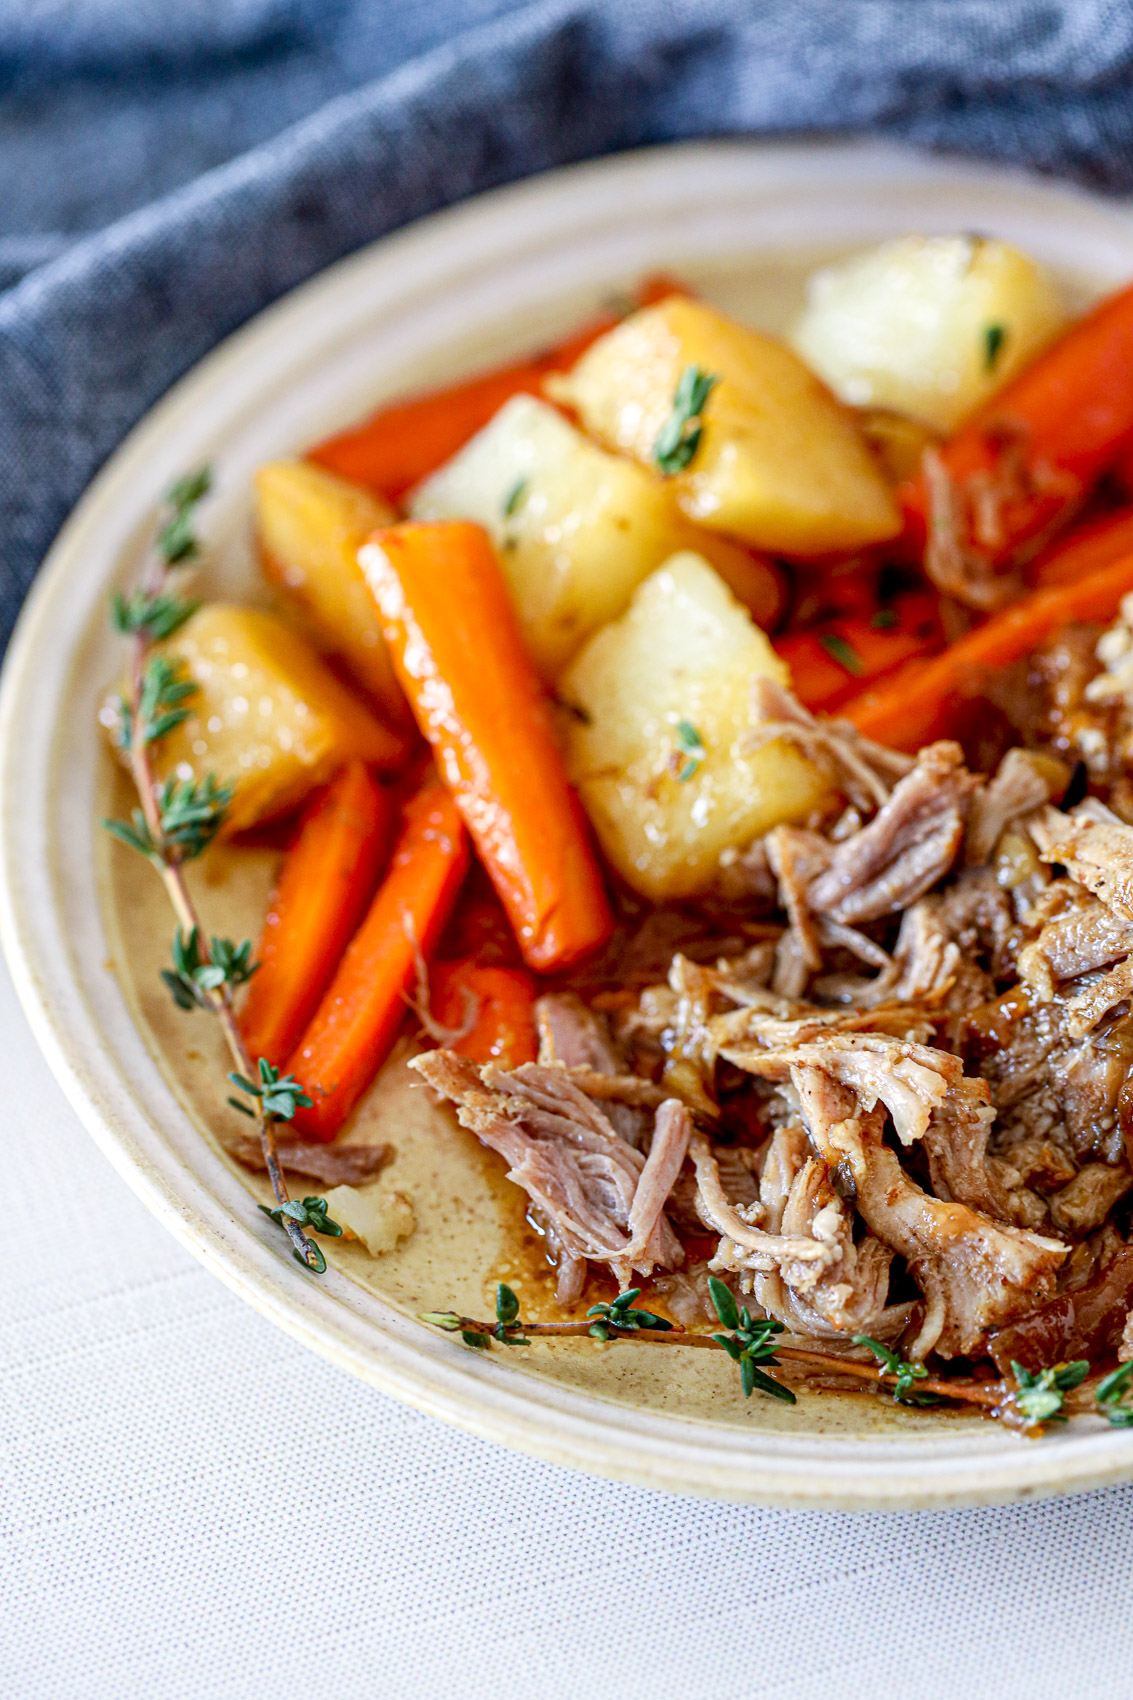 instant pot pork roast with thyme sprigs, potatoes, and carrots in a savory juice